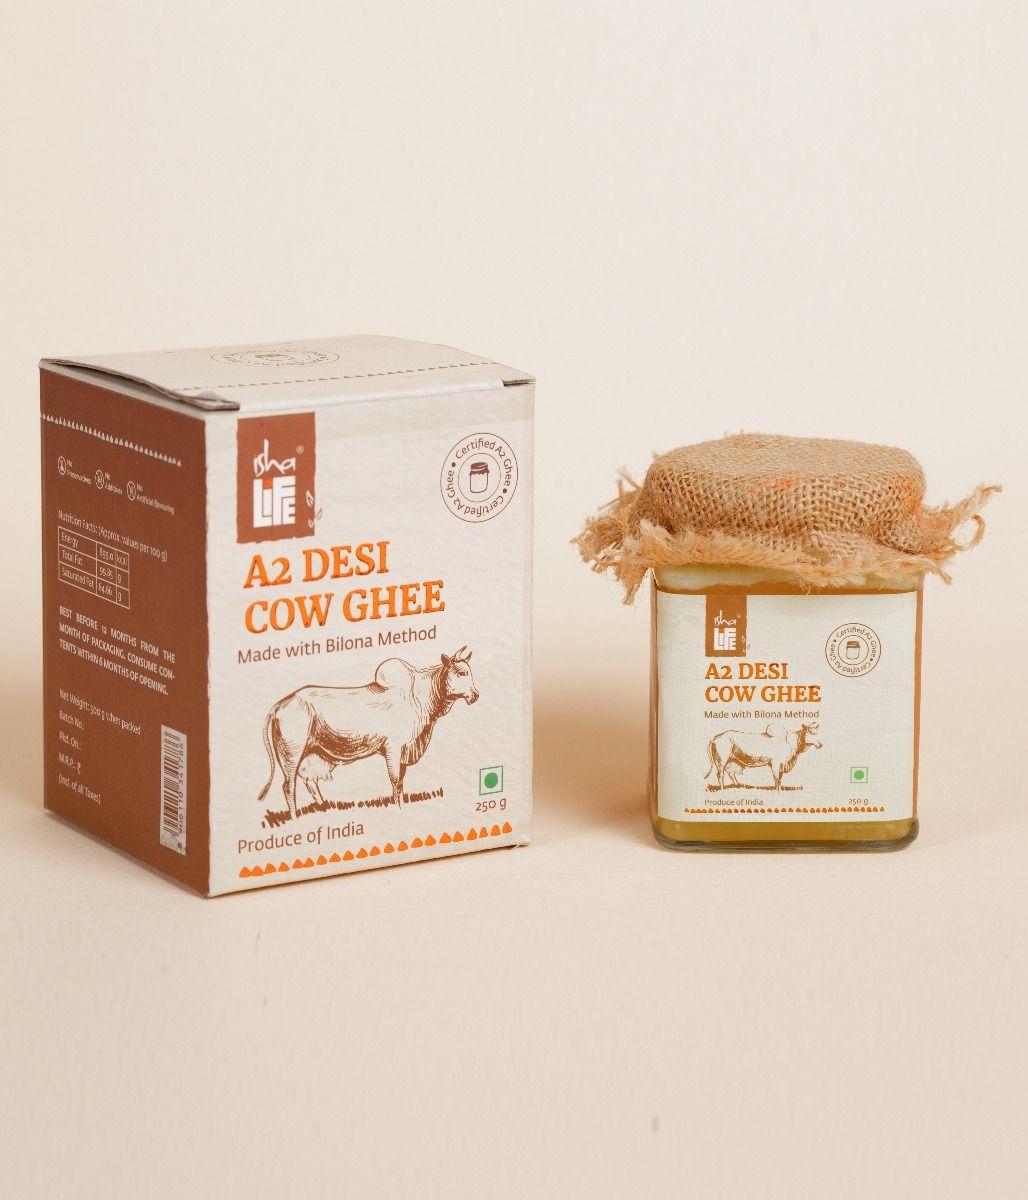 Picture of Isha Life Pure A2 Desi Cow Ghee(250gm). Made traditionally from curd. Made from grass-fed free grazing desi cows' milk. Extracted using non-exploitative methods. Bilona ghee